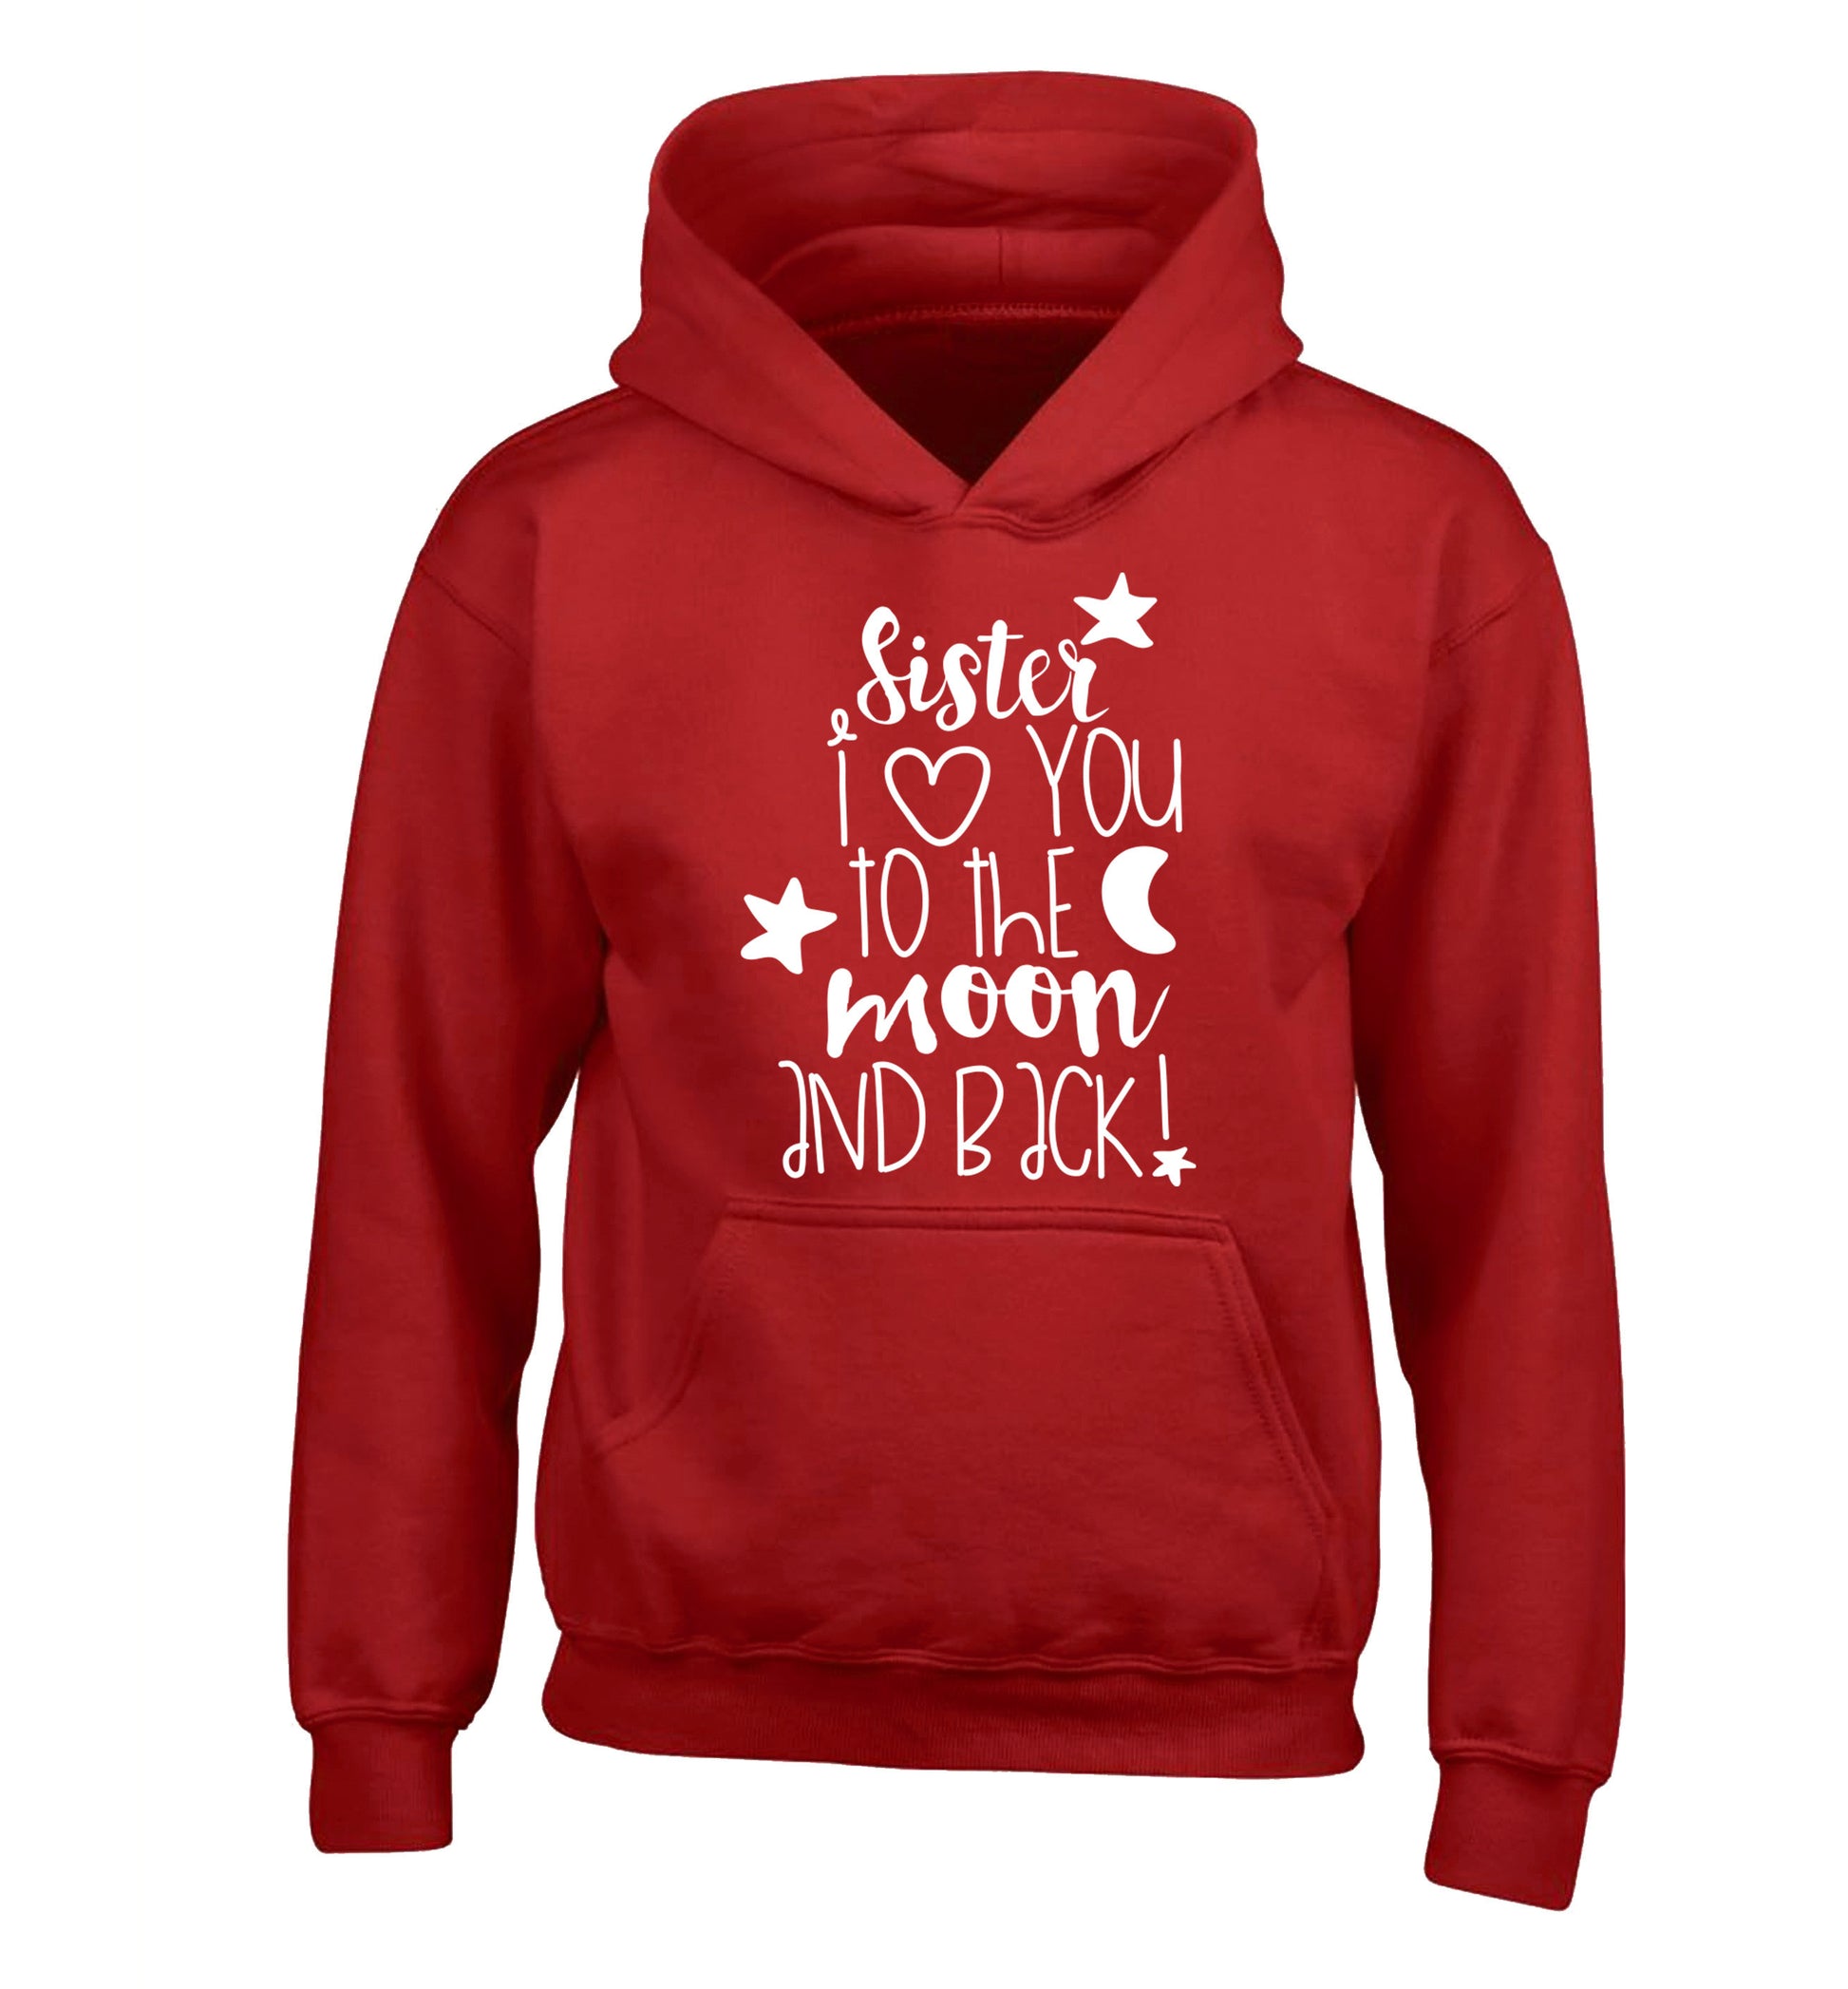 Sister I love you to the moon and back children's red hoodie 12-14 Years